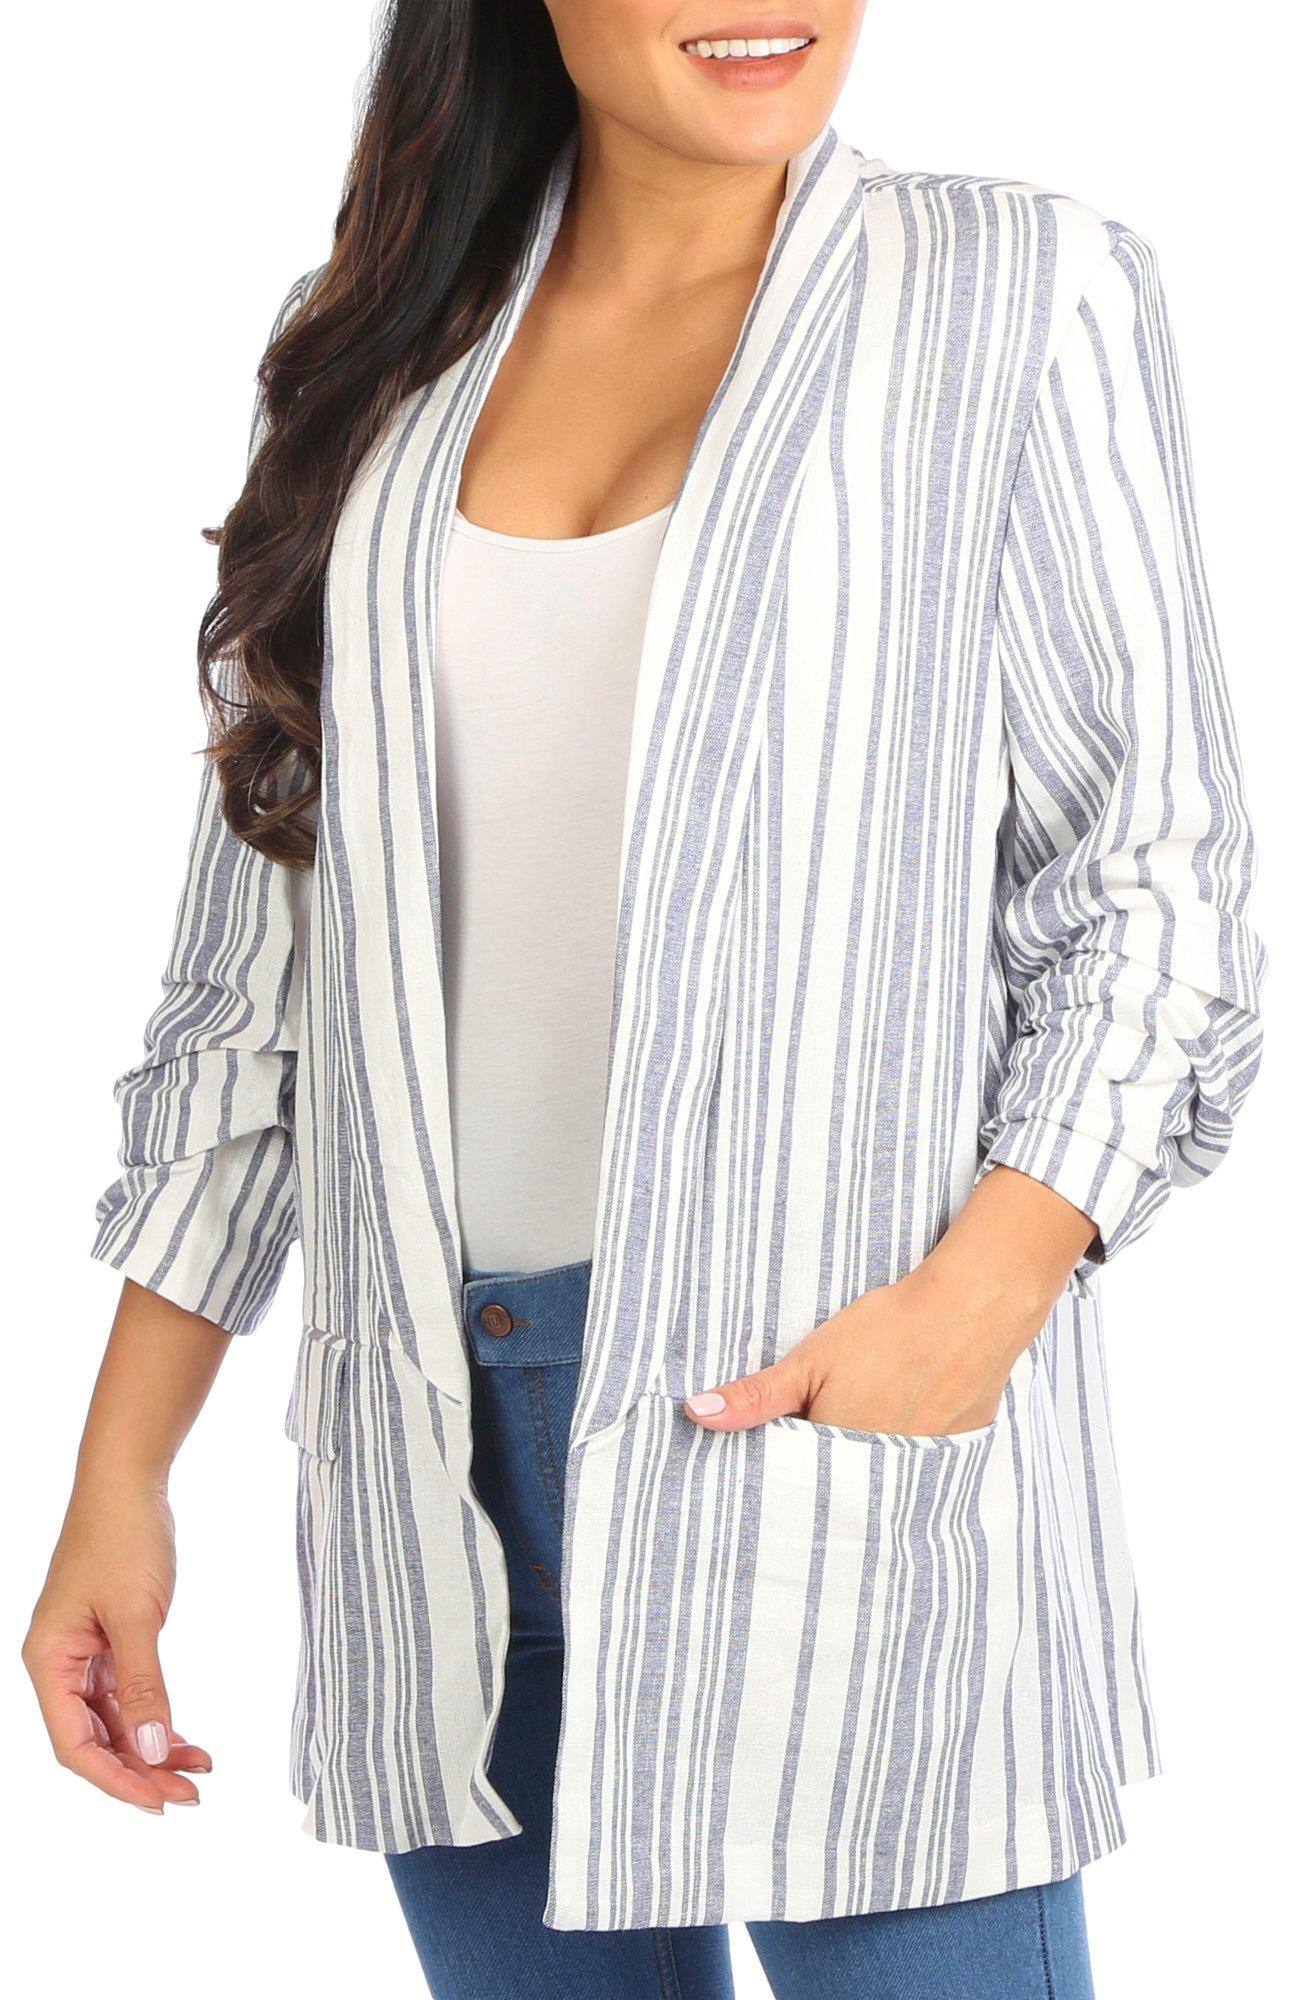 Blue Sol Womens 3/4 Ruched Sleeve Stripes Crepe